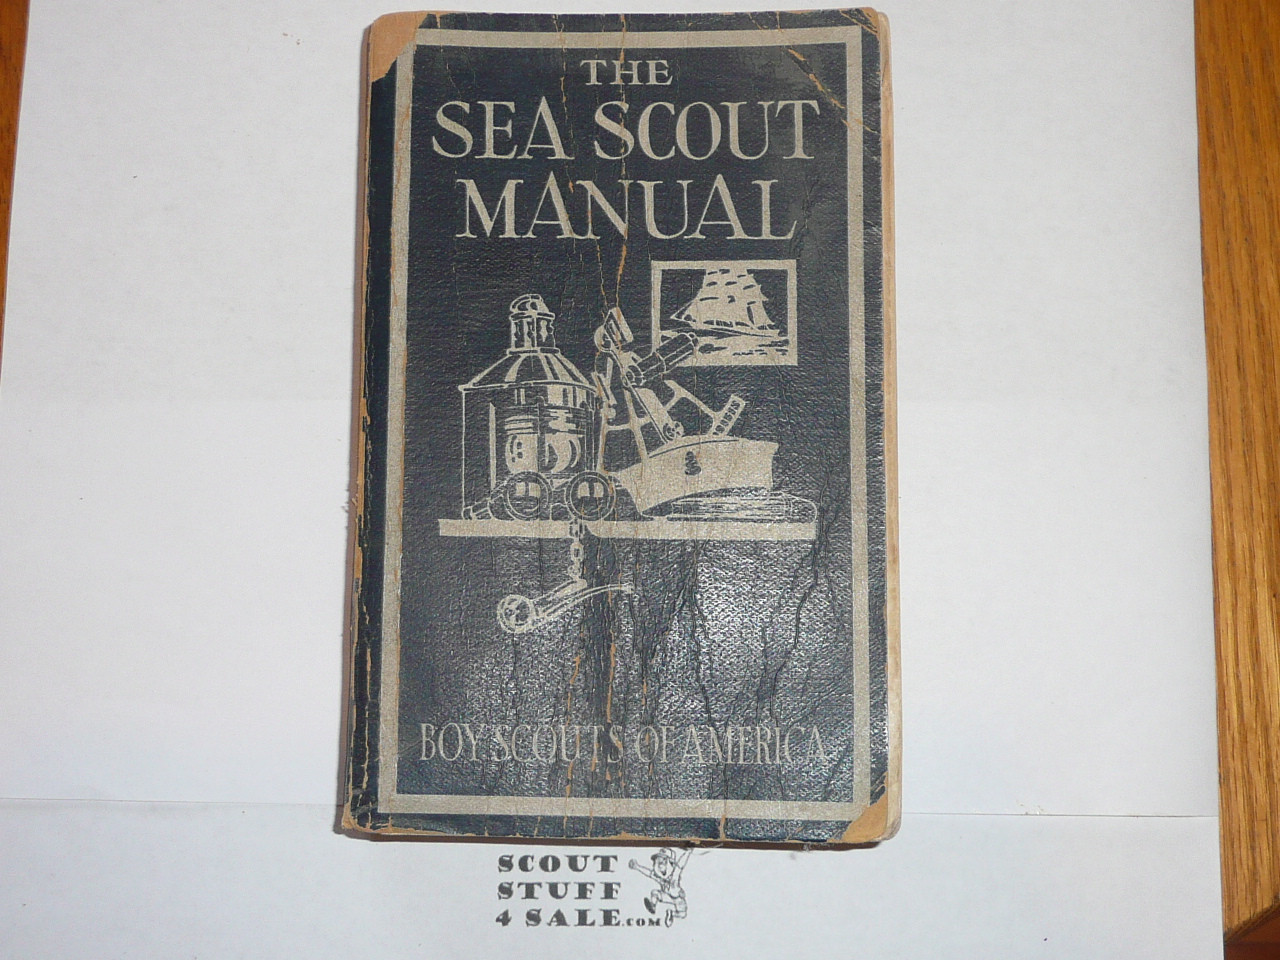 1939 The Sea Scout Manual, Sixth Edition, First Printing, good used condition